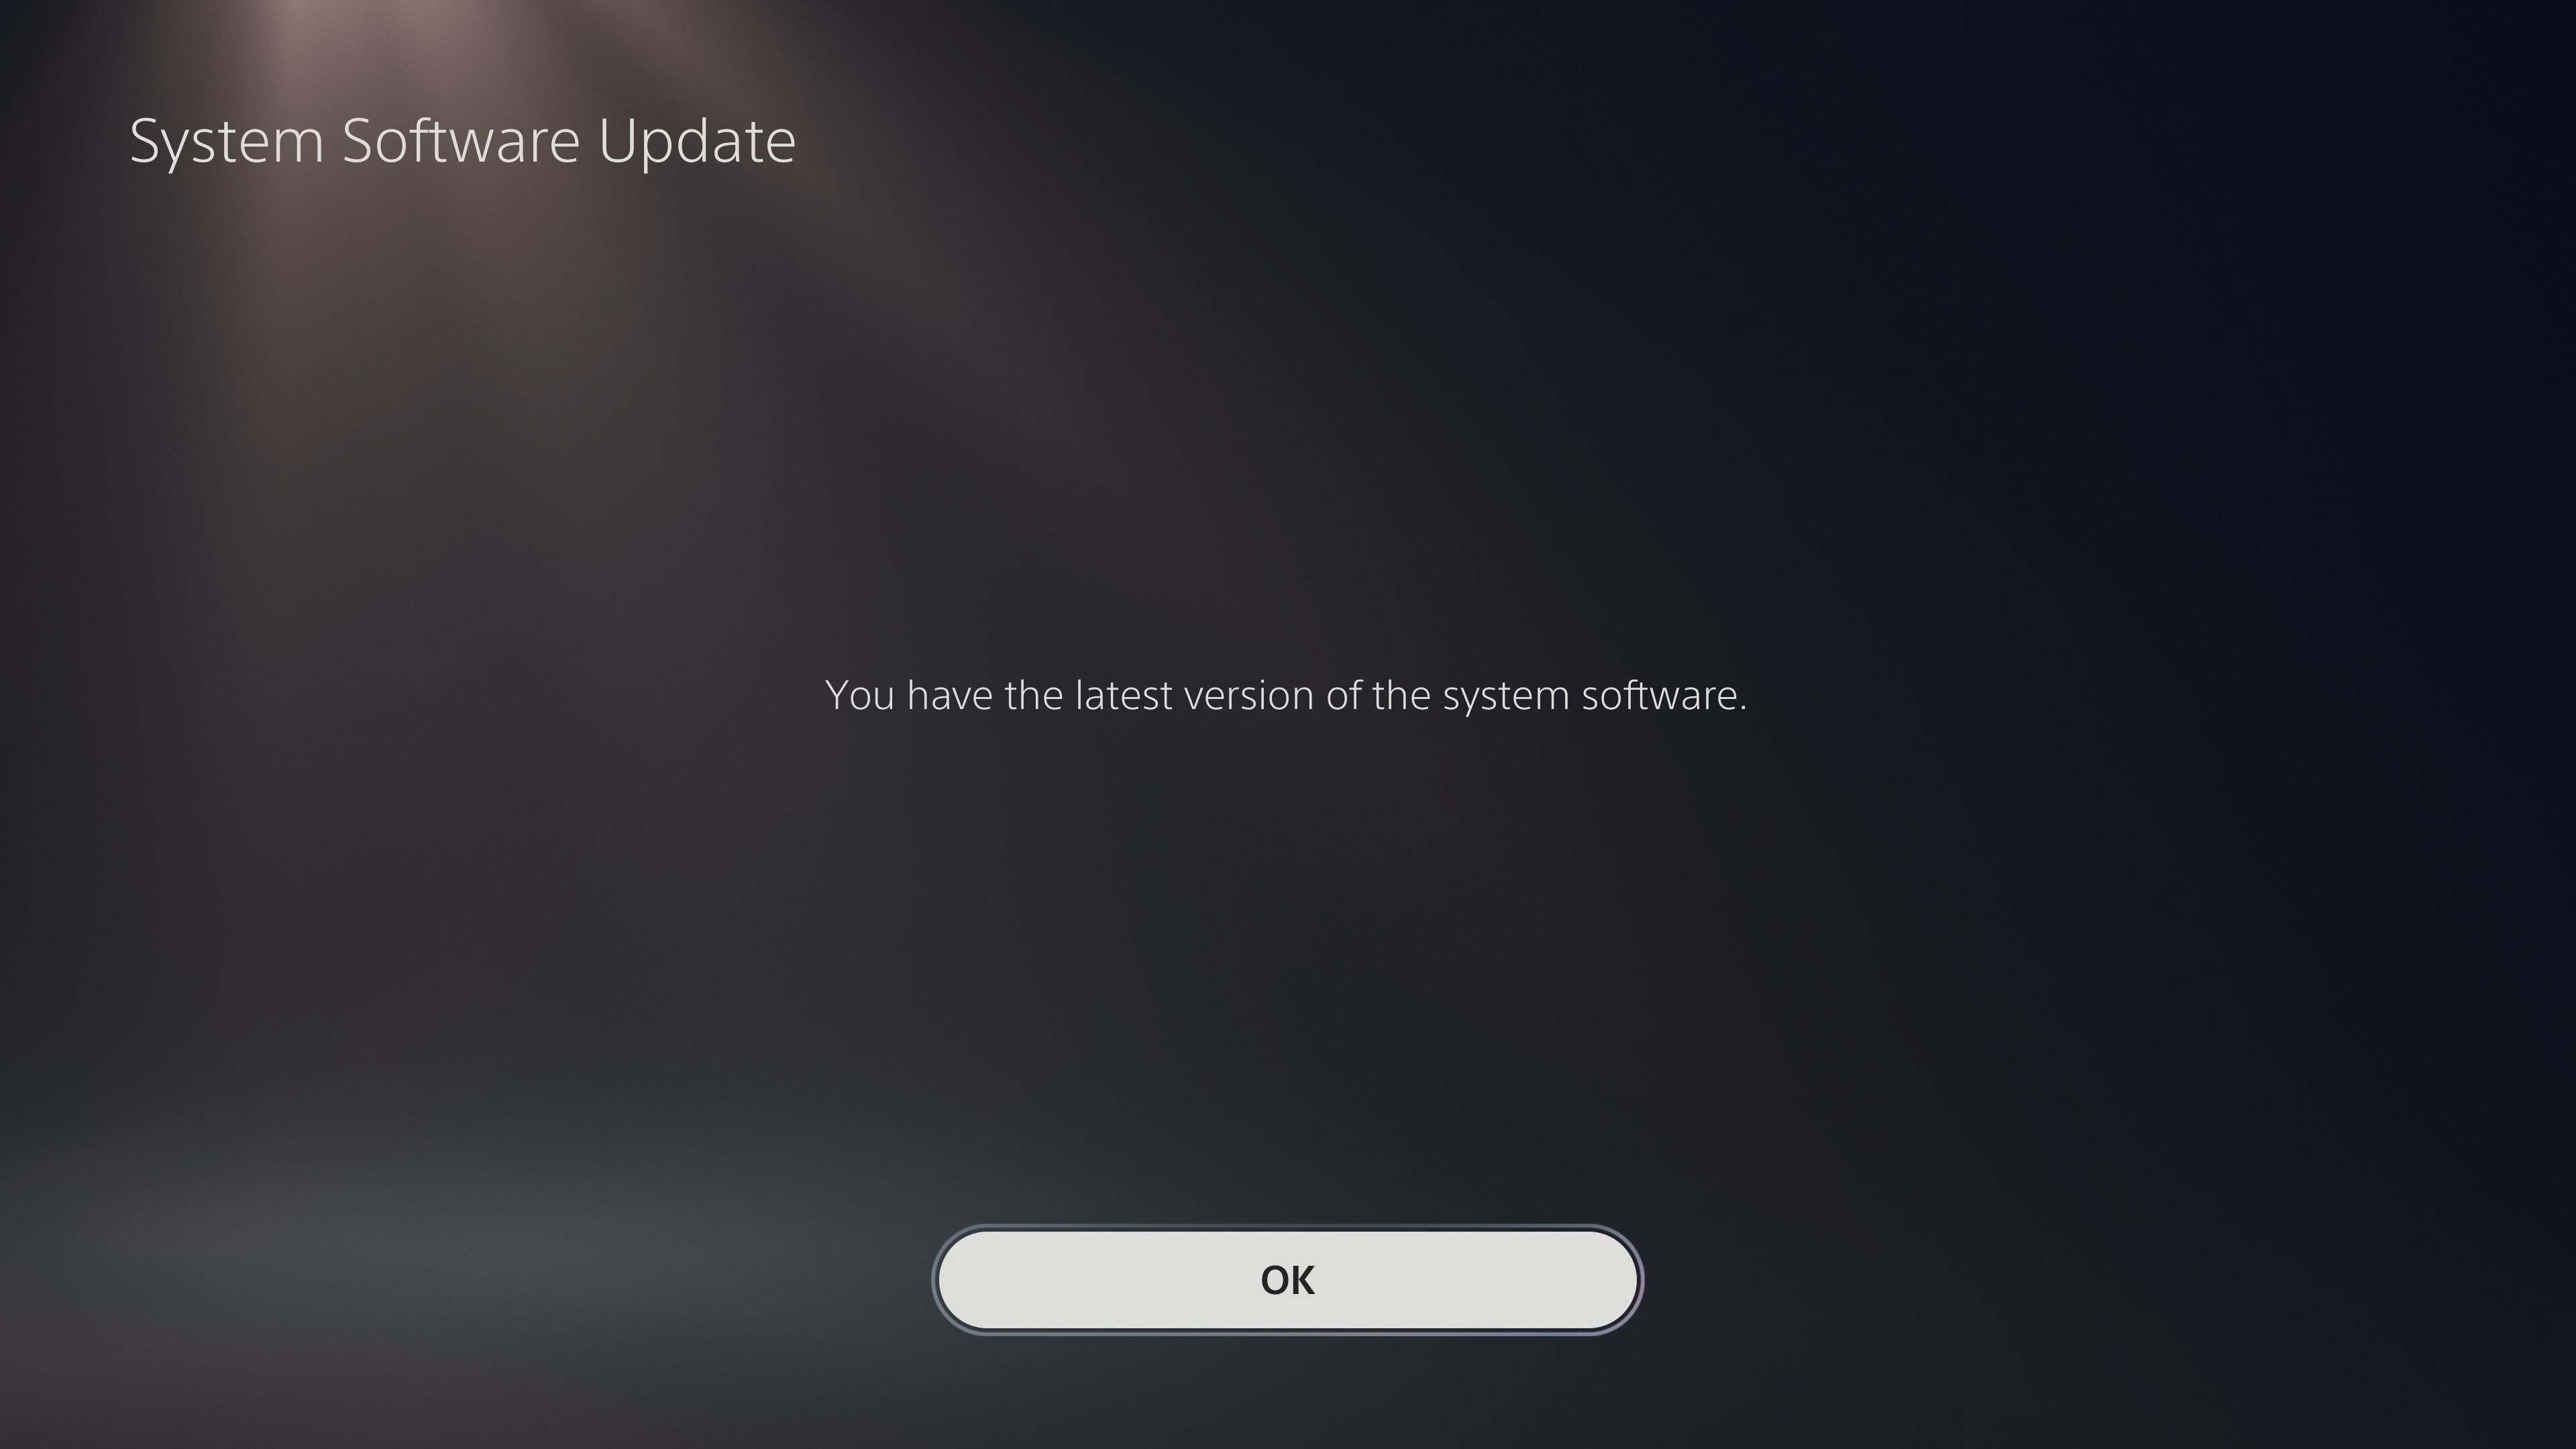 PS5 Latest Software Installed